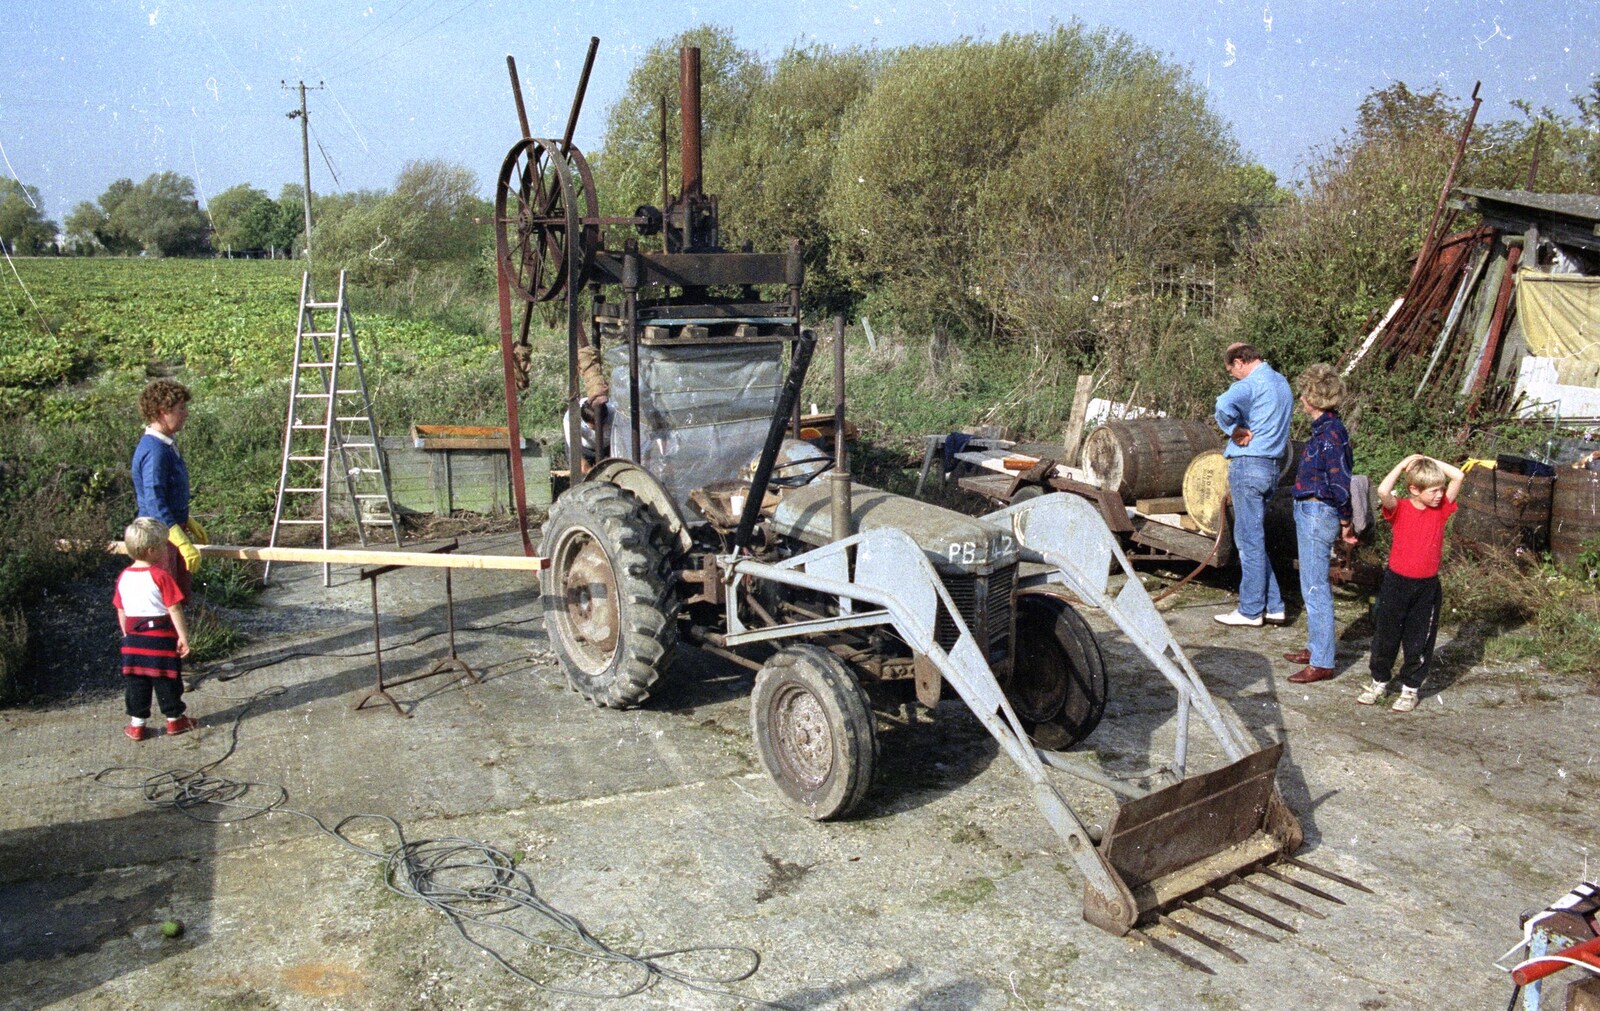 Winnie the tractor from The Annual Cider Making Event, Stuston, Suffolk - 11th October 1990